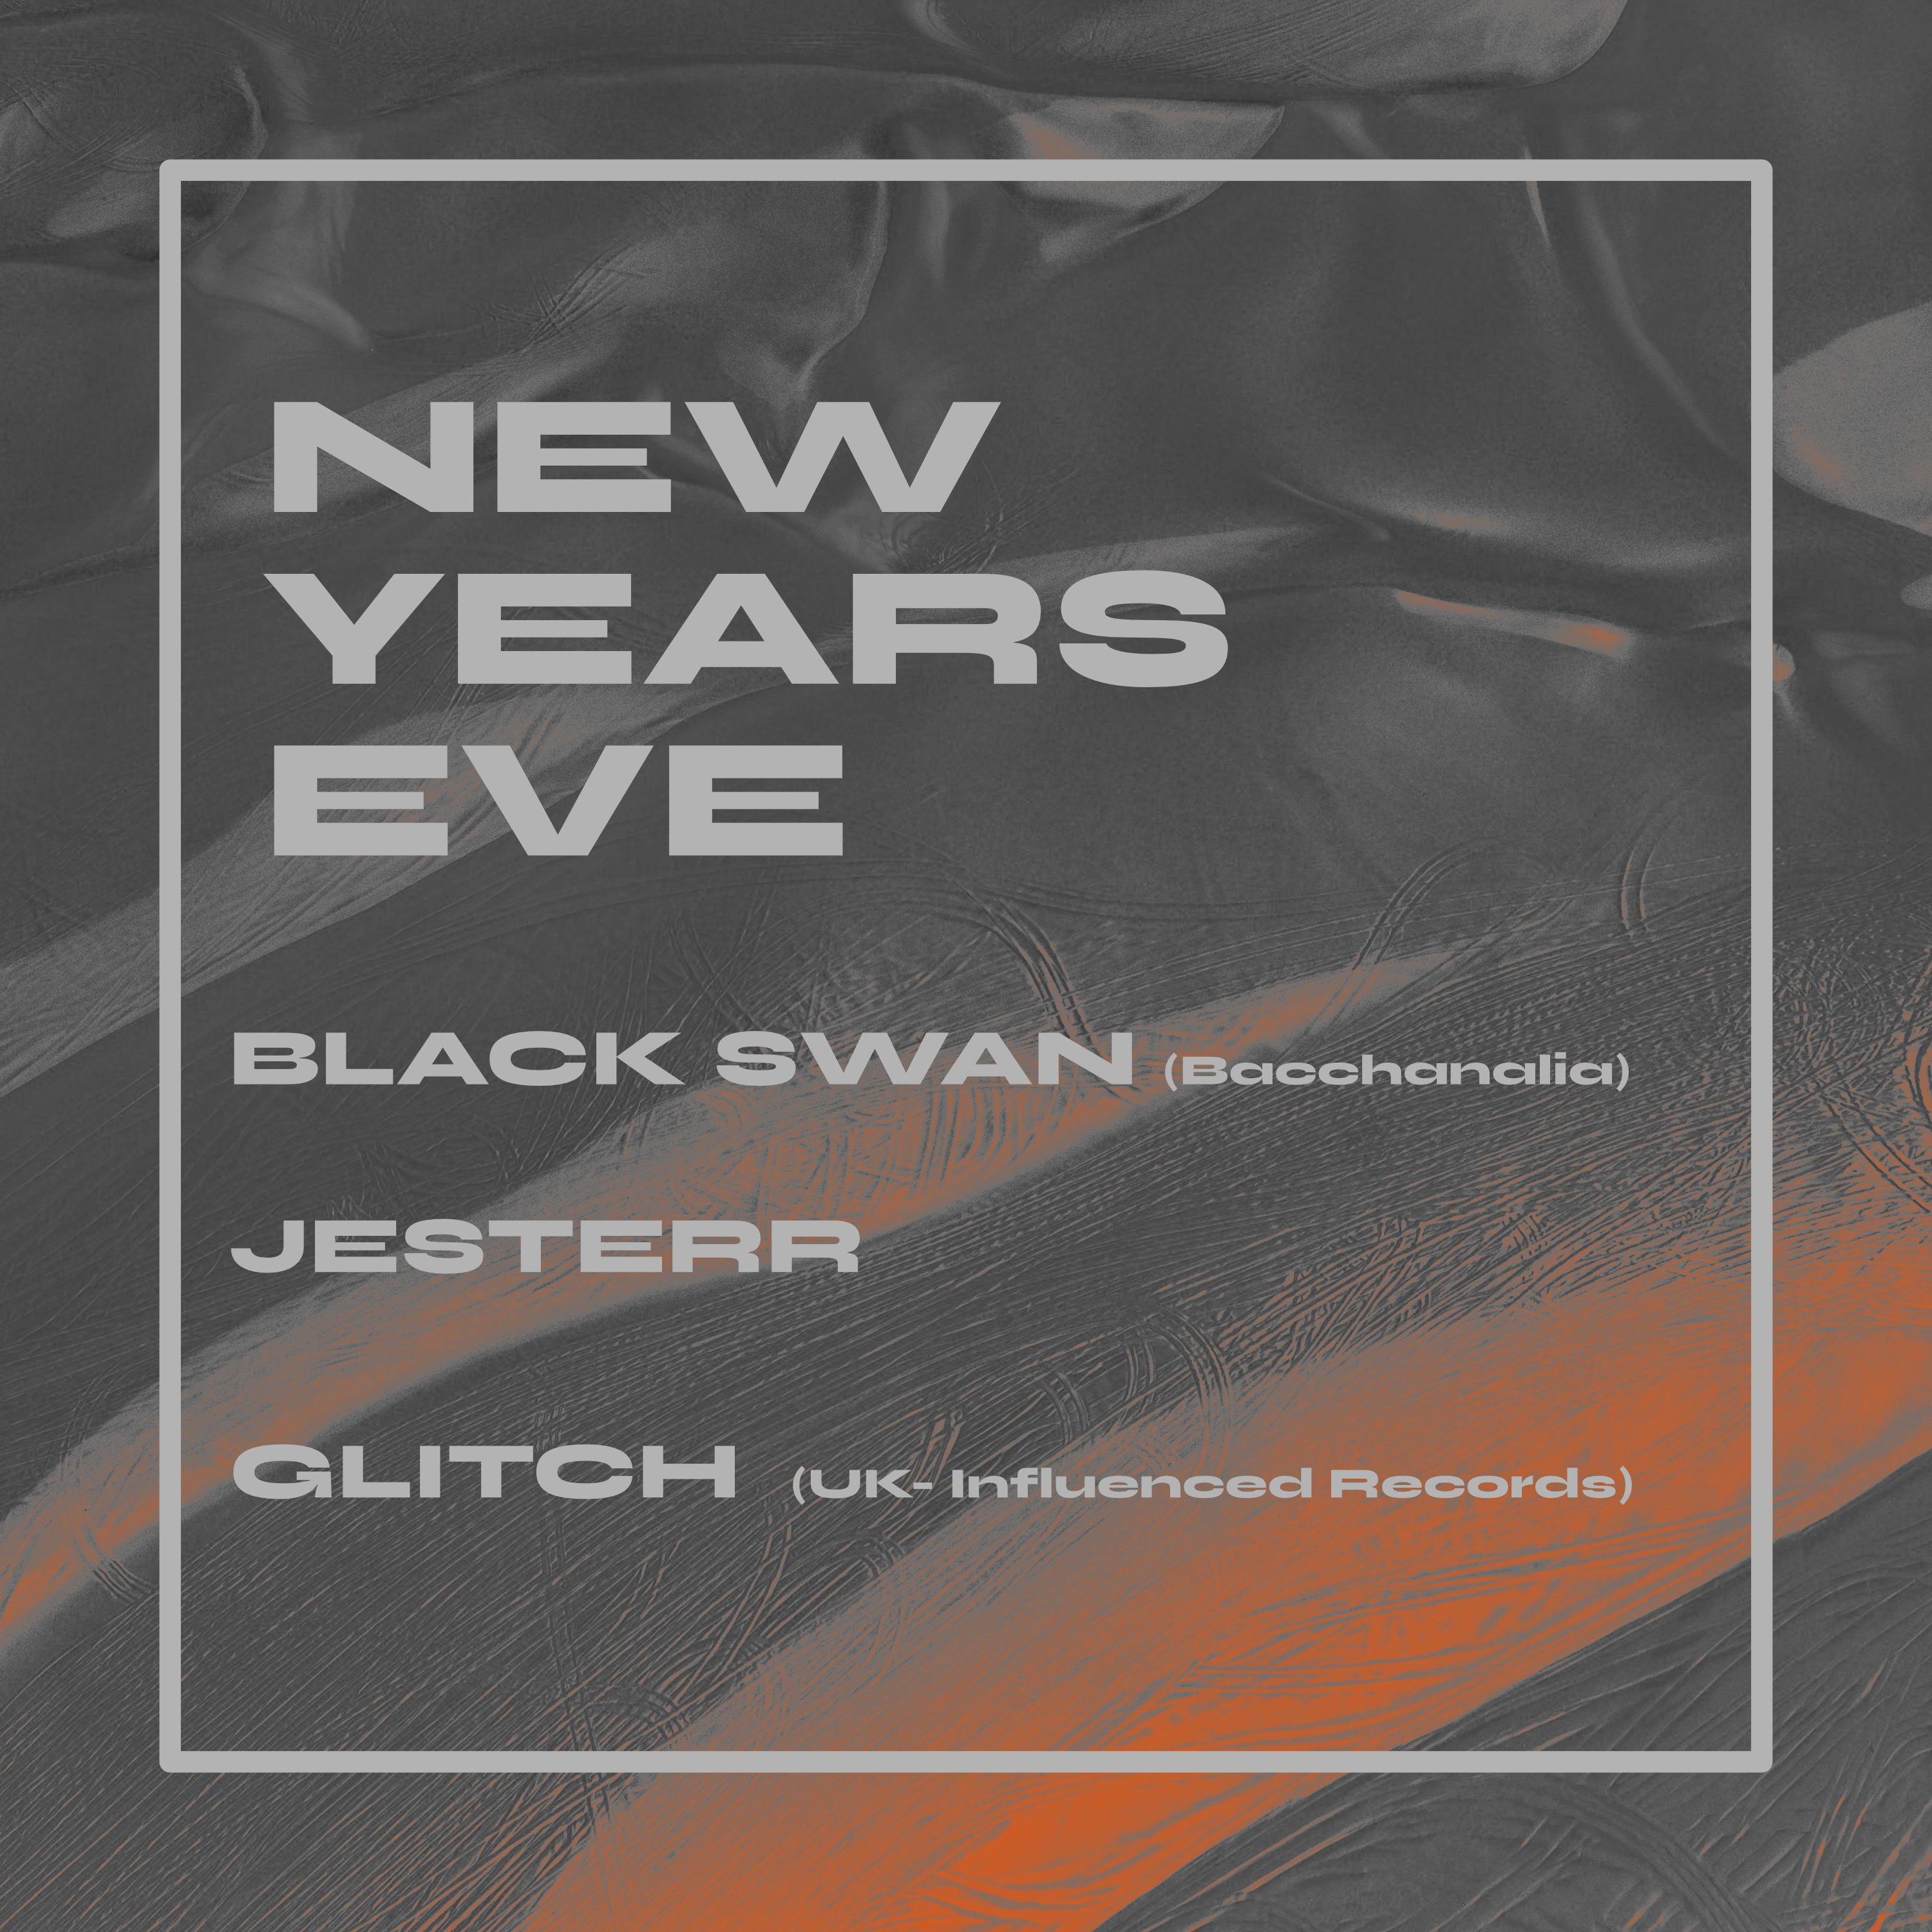 New Year Eve with GLITCH, JESTERR and BLACK SWAN Boat - フライヤー表